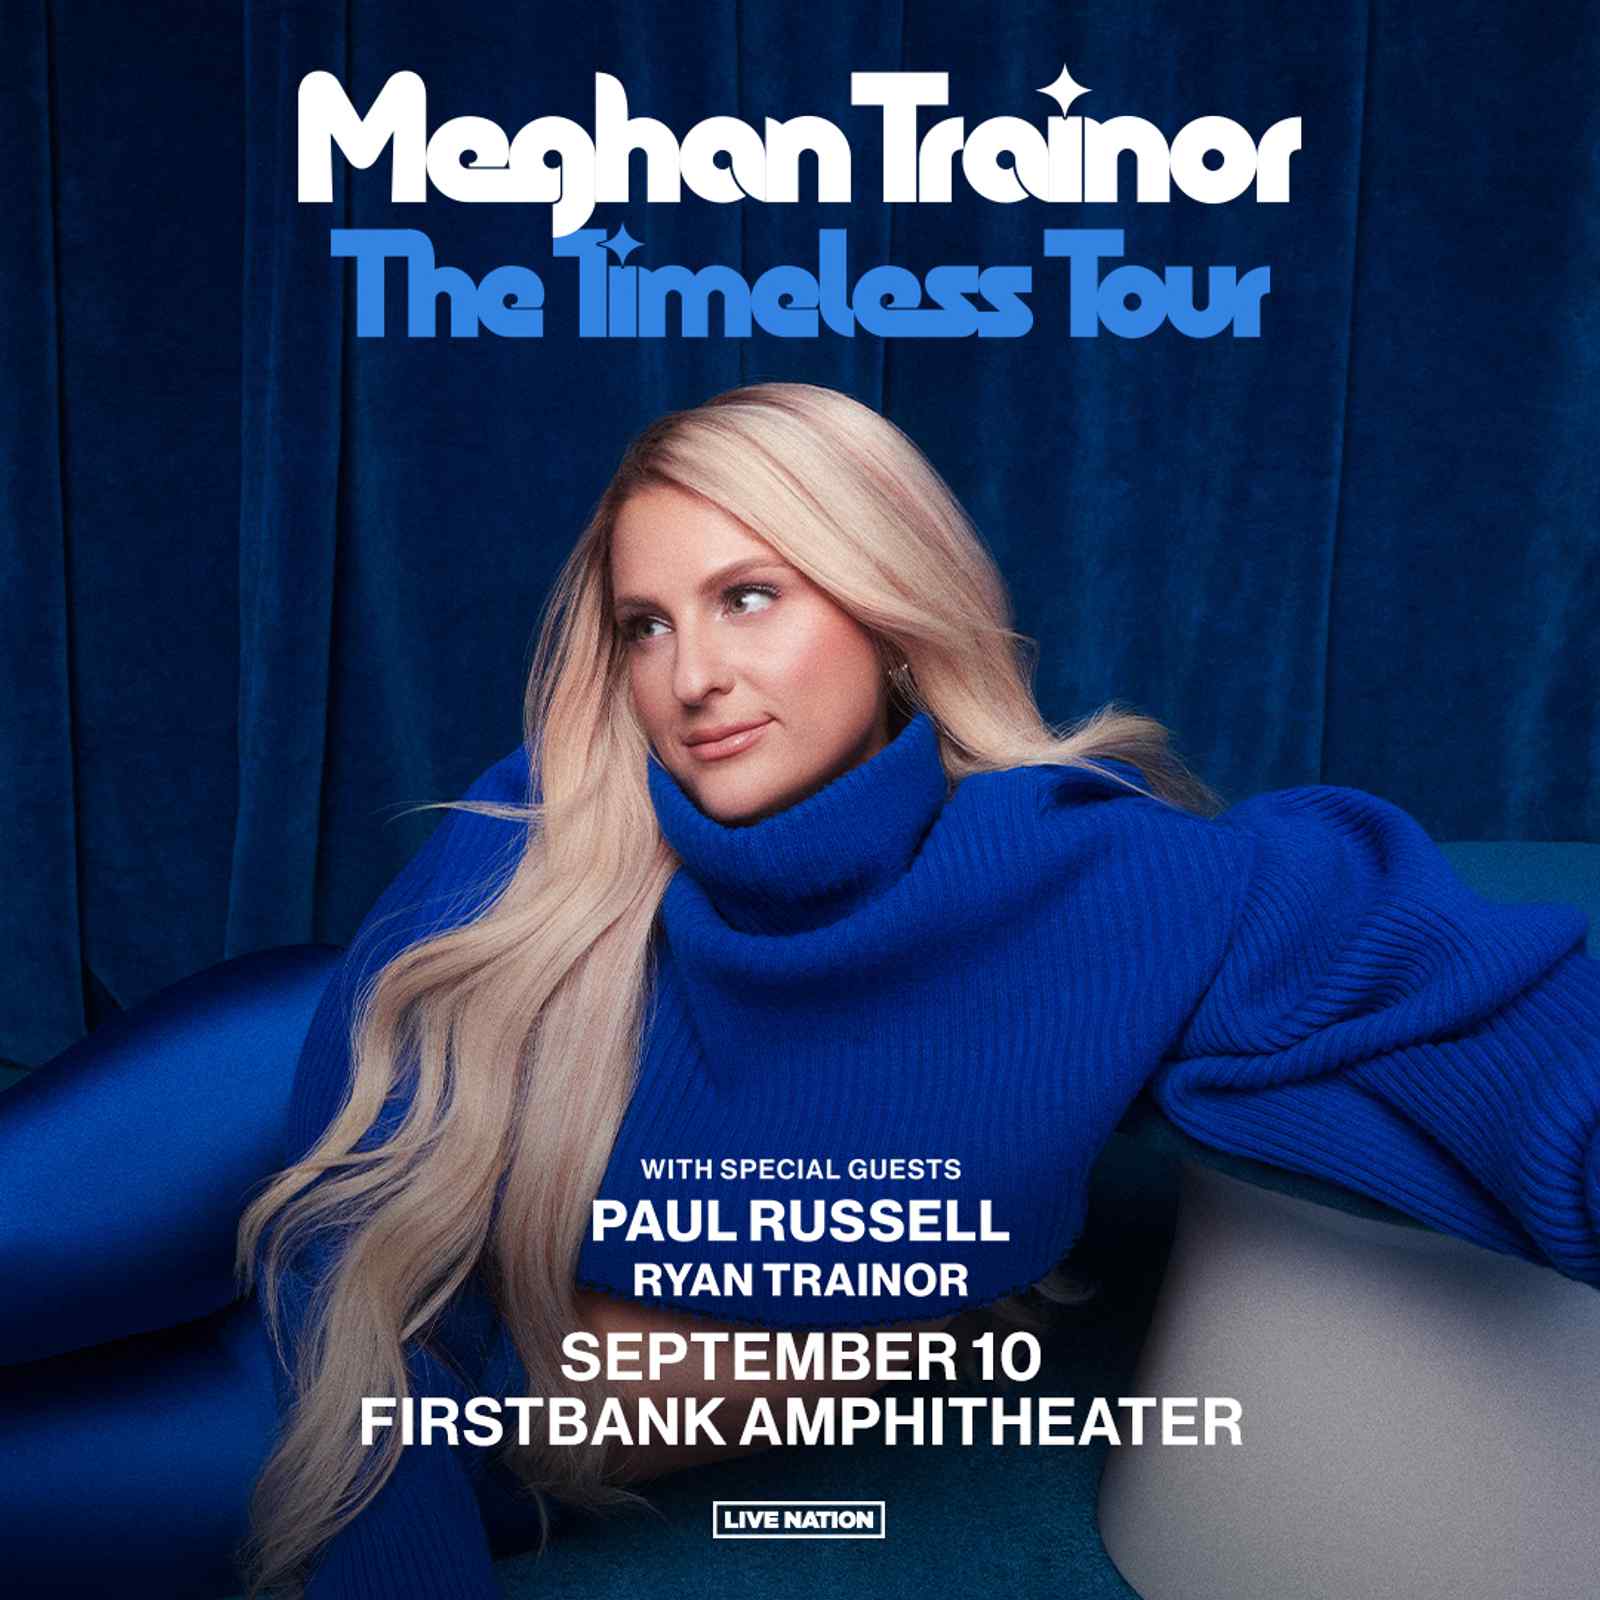 Meghan Trainor The Timeless Tour with special guests Paul Russell and Ryan Trainor - 6:30 PM